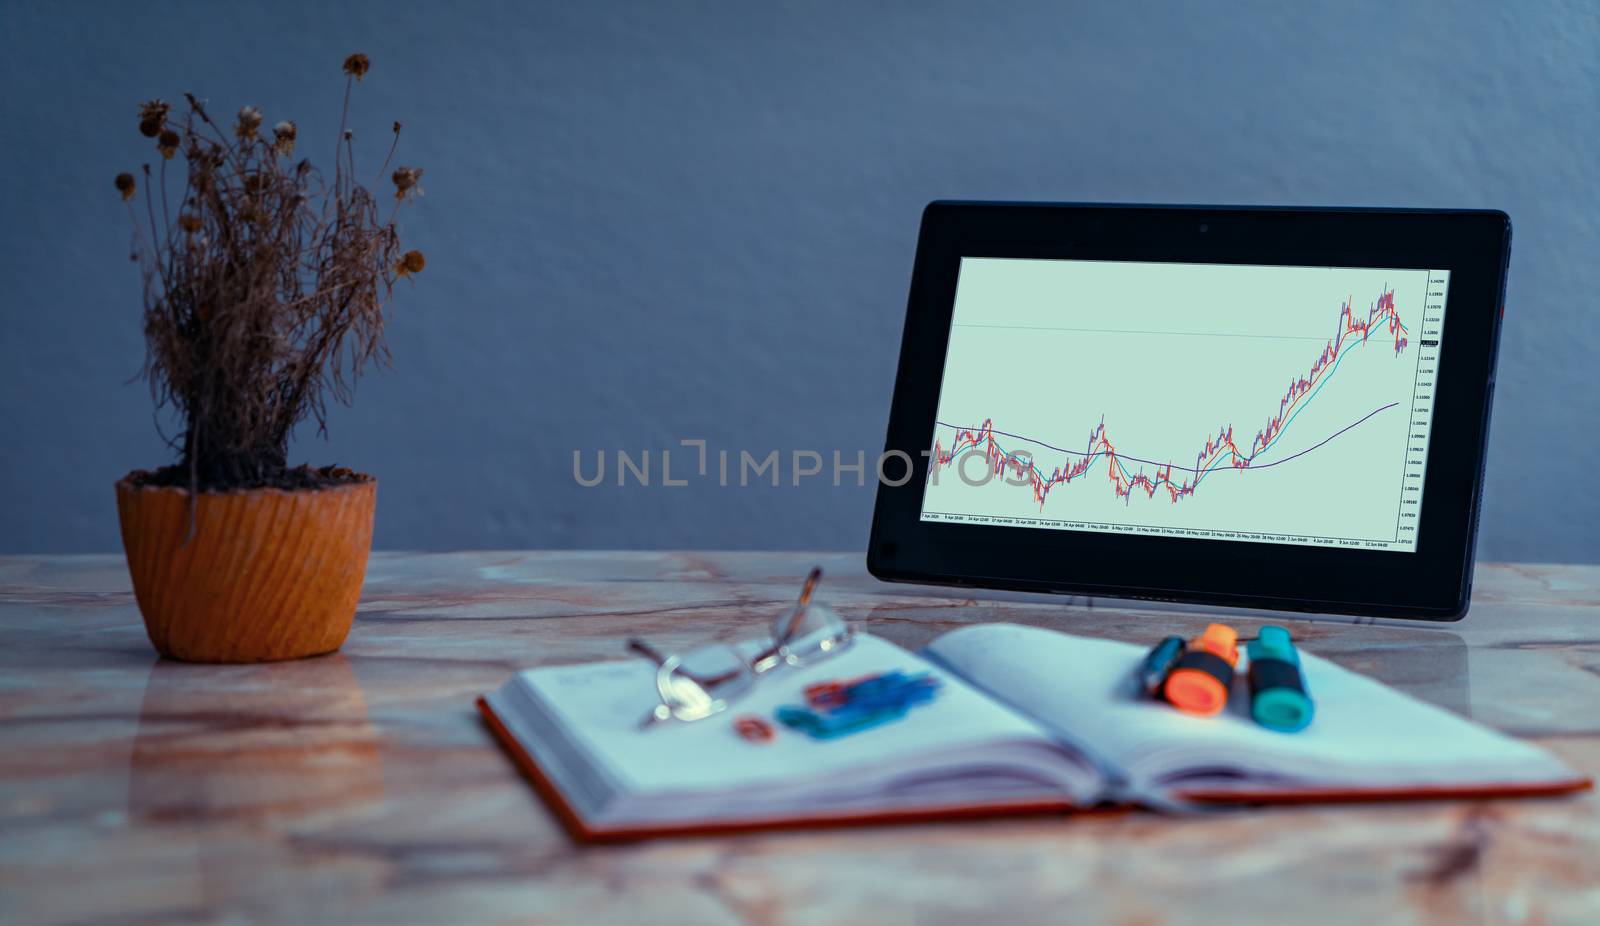 Screen of a tablet on a desk with a chart of currency pairs. On the desk there is an out of focus notebook